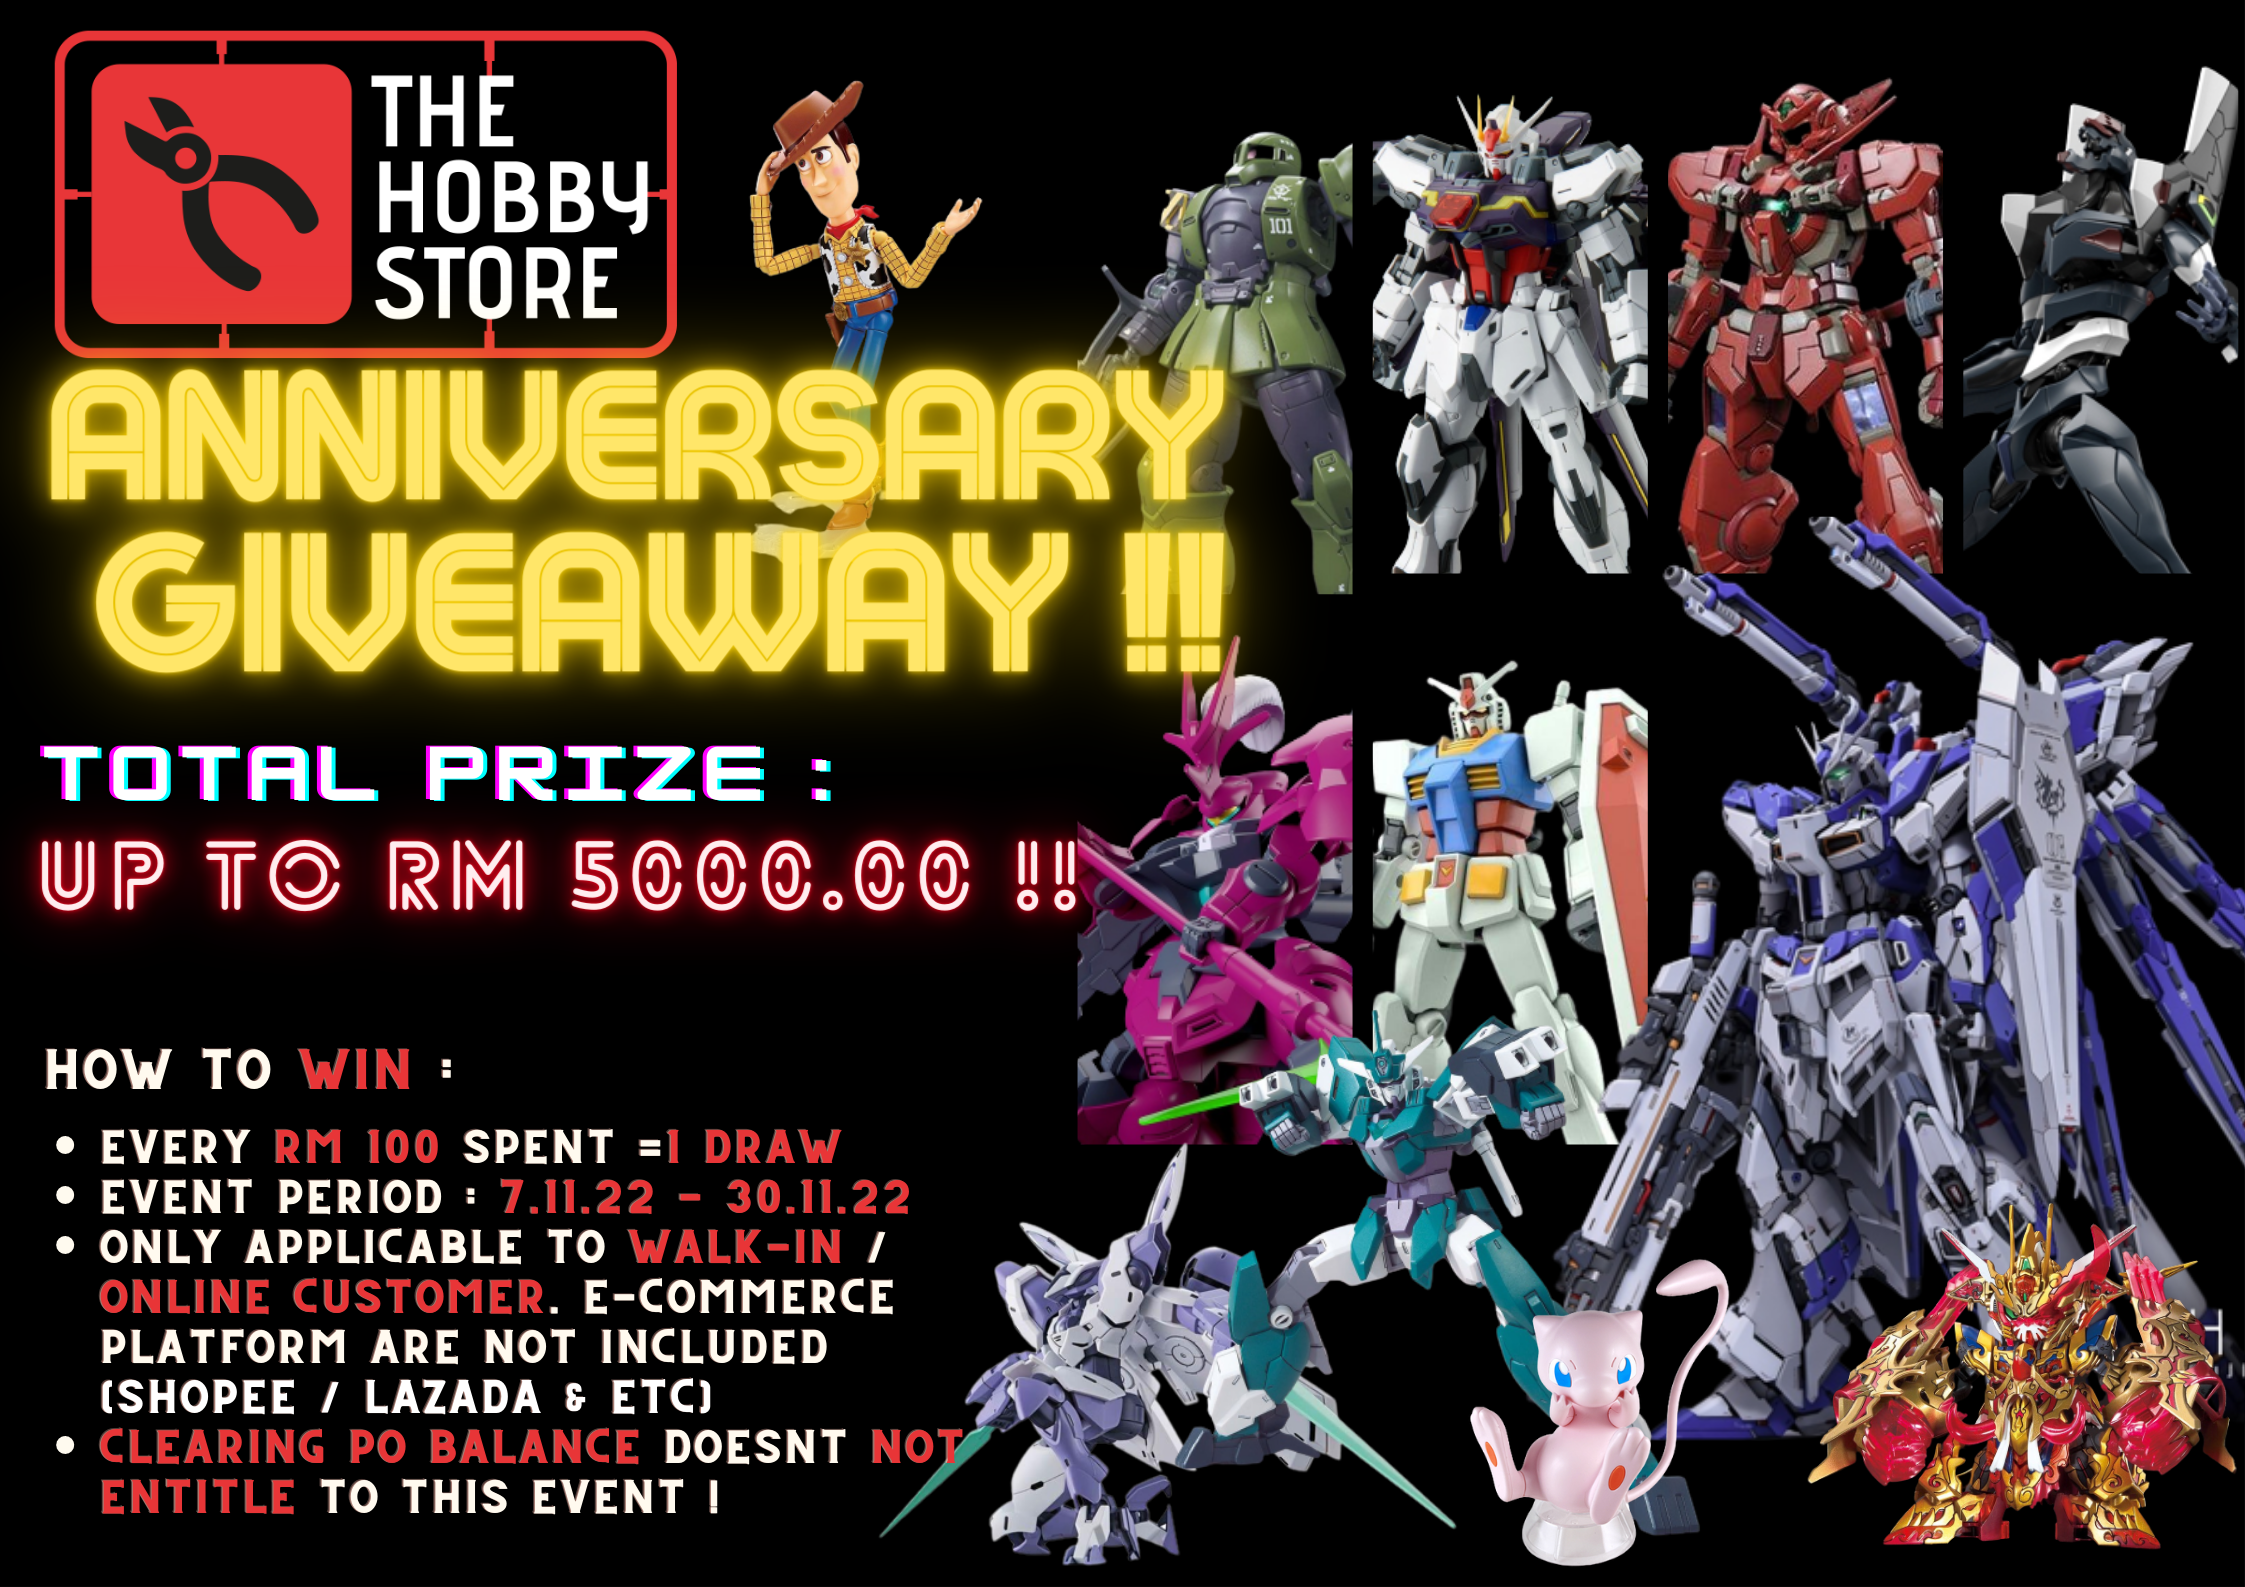 [Announcement] The Hobby Store Anniversary Give Away